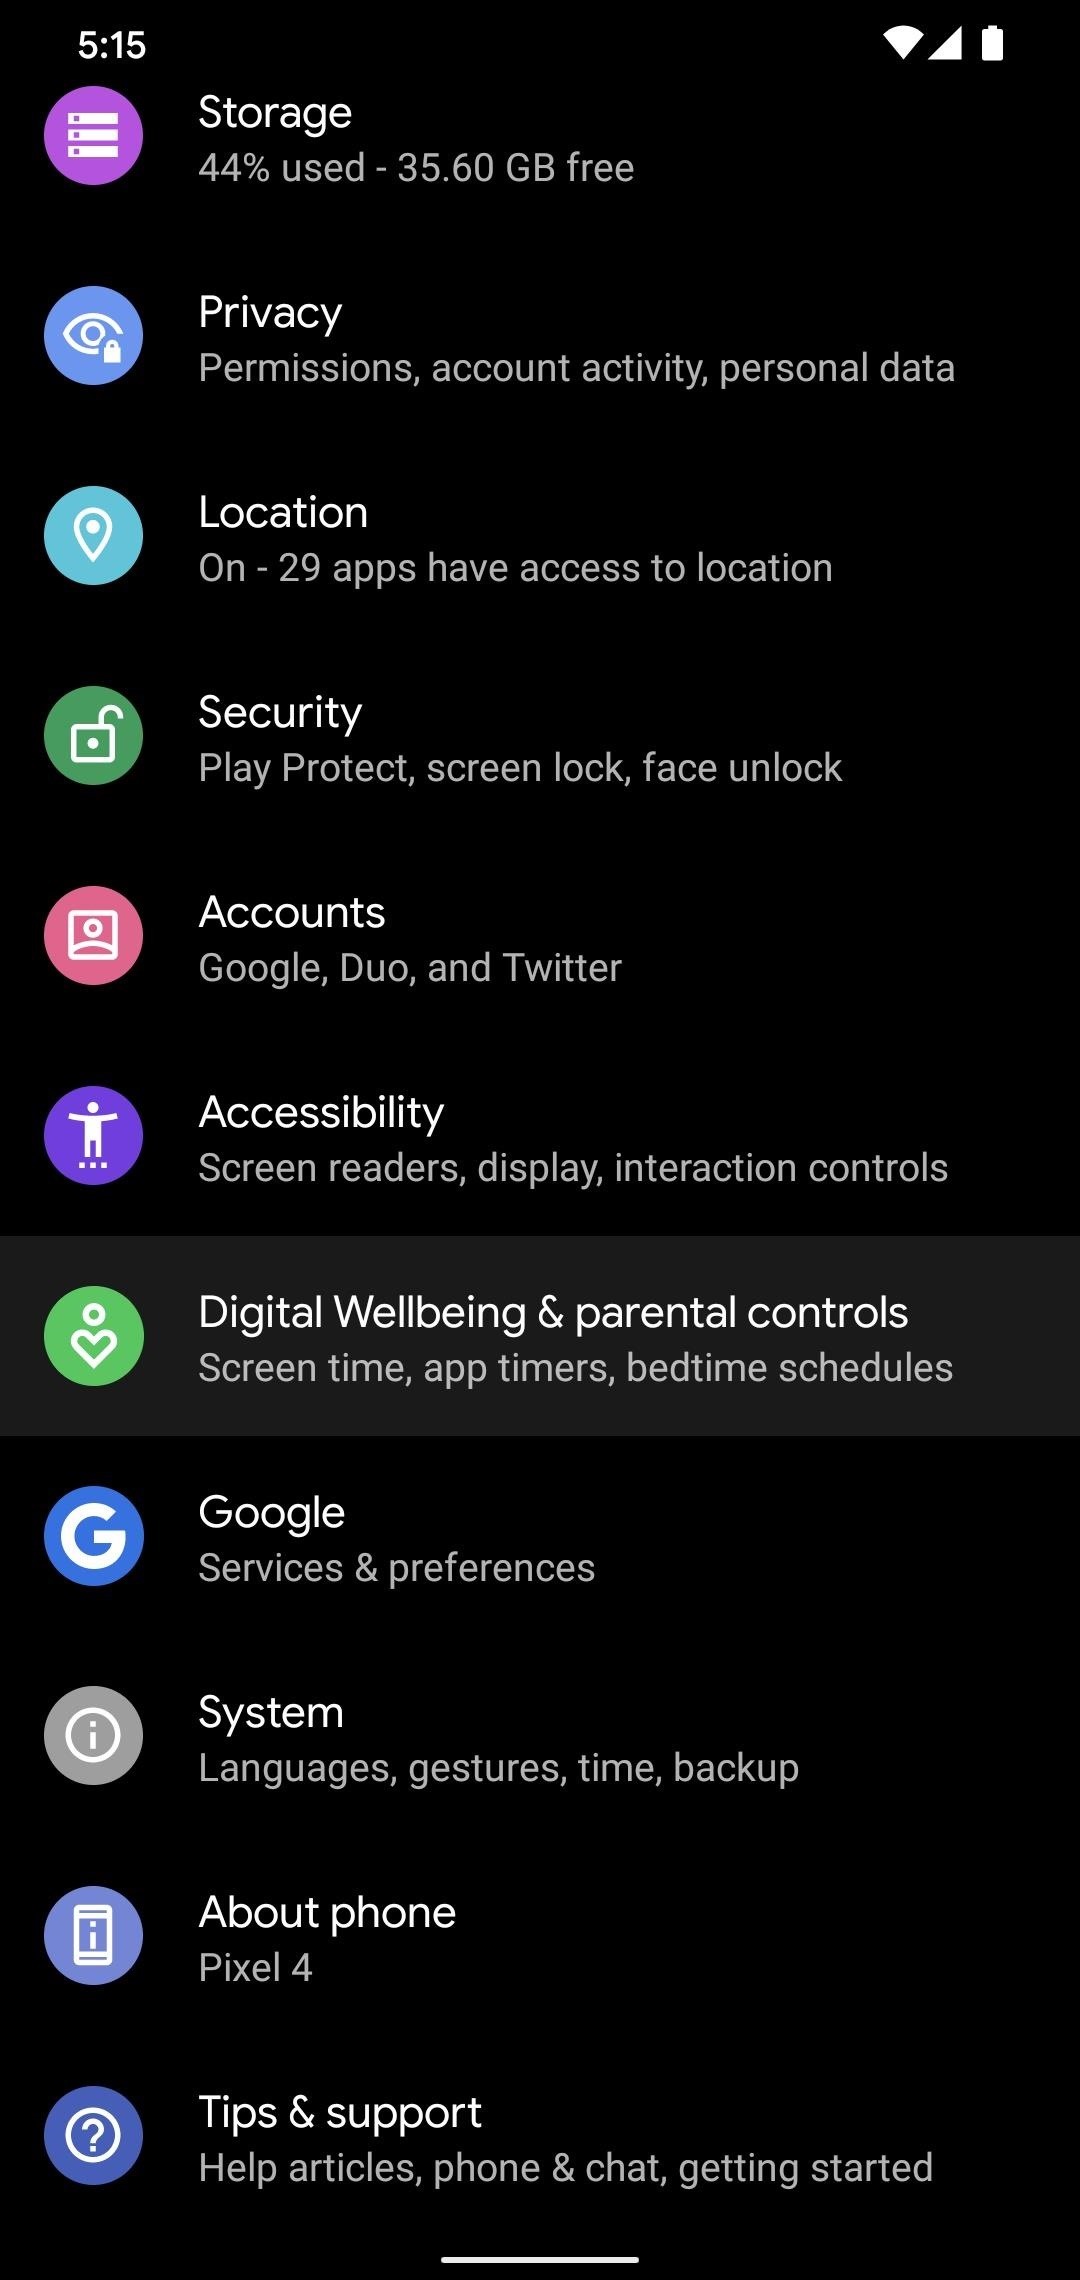 How to Enable Bedtime Mode on Your Android Device